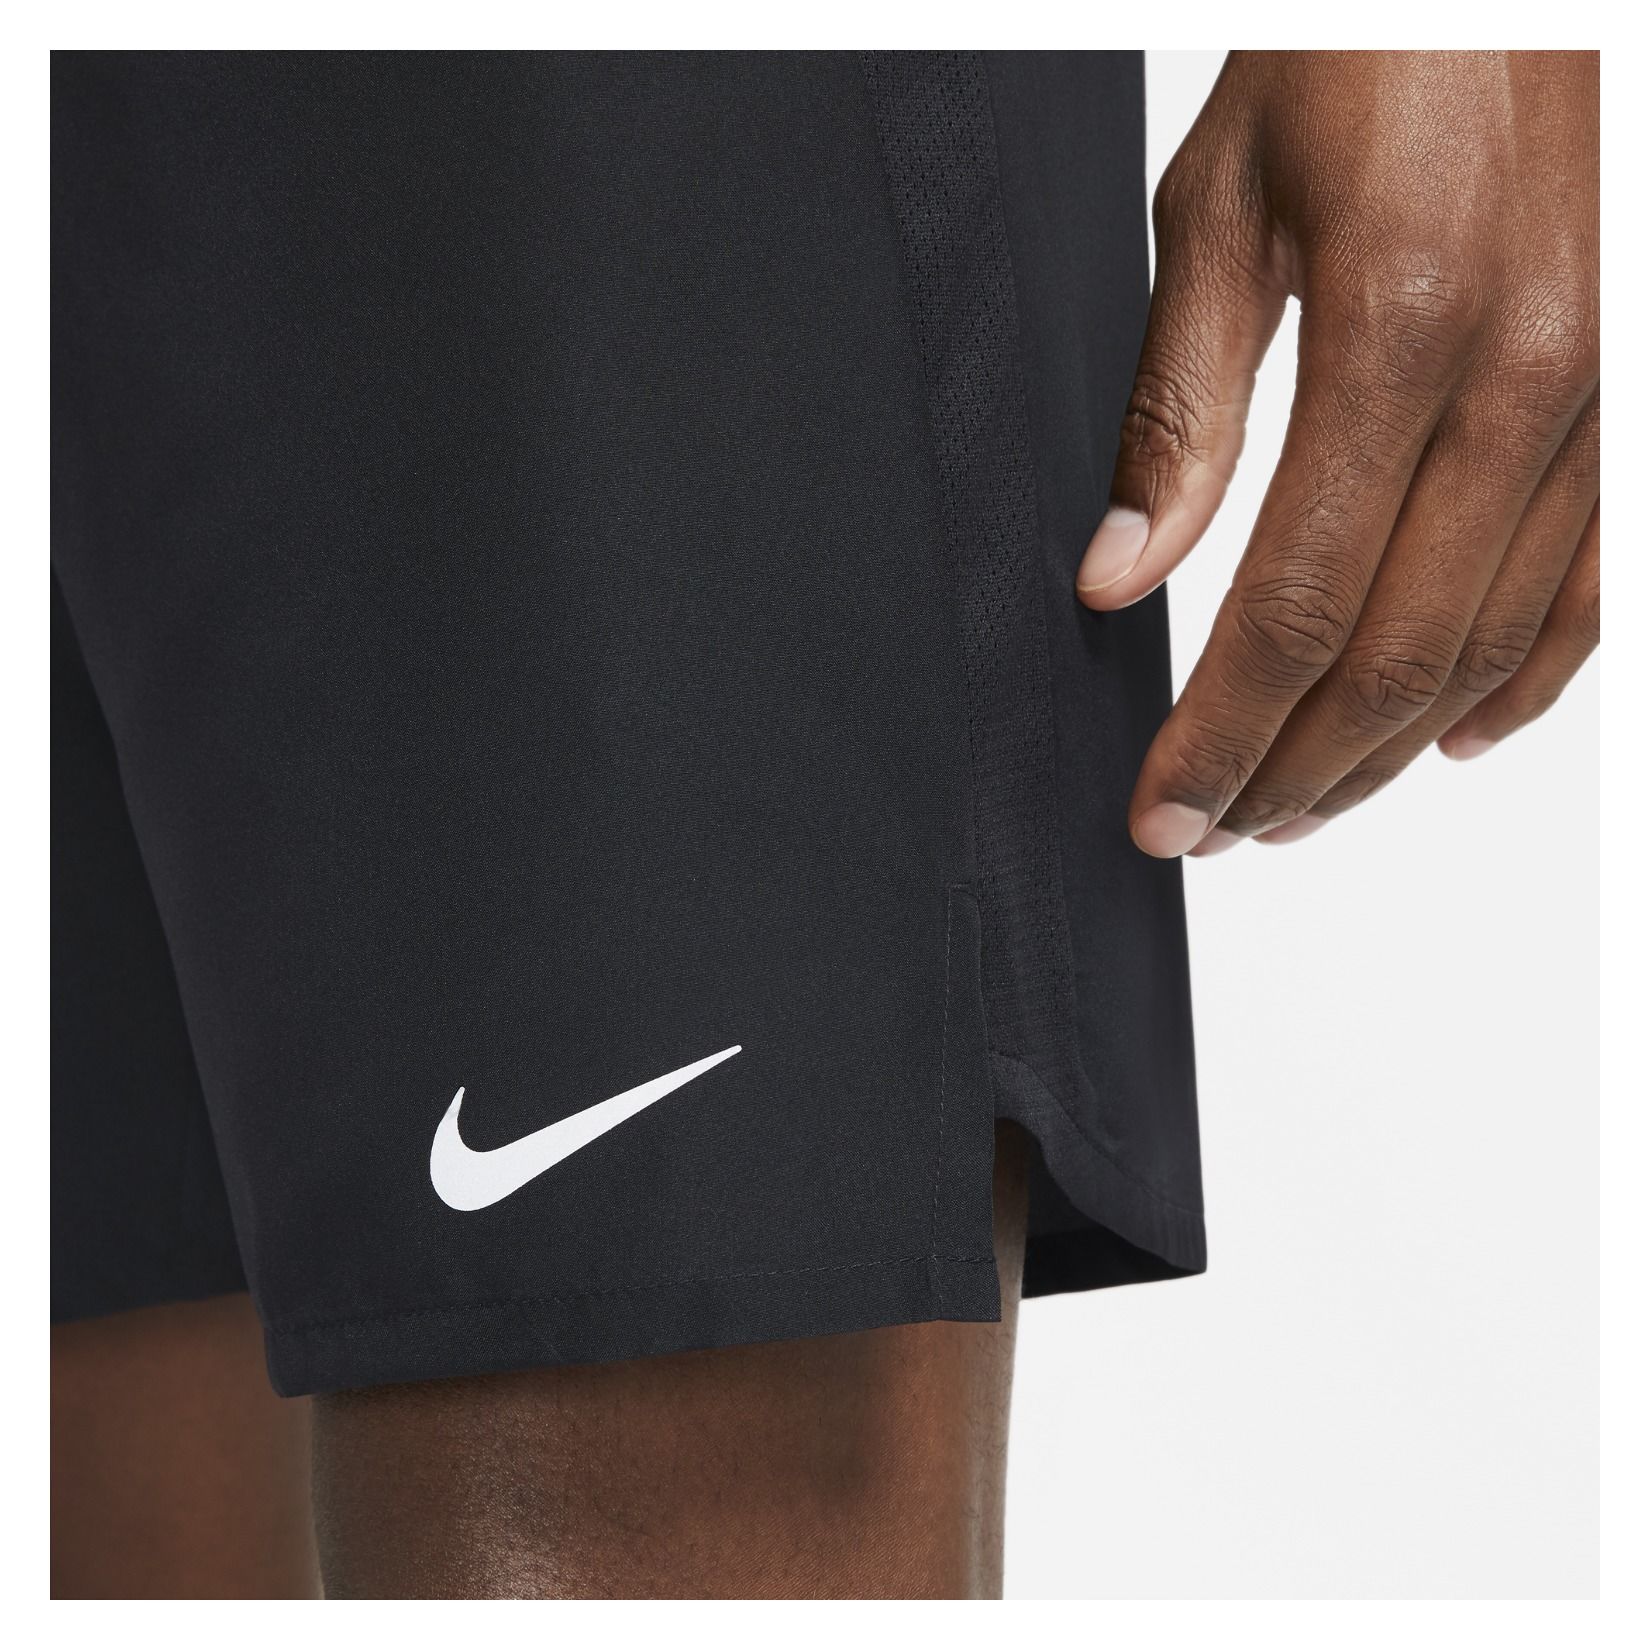 Nike Challenger Brief-Lined Running Shorts